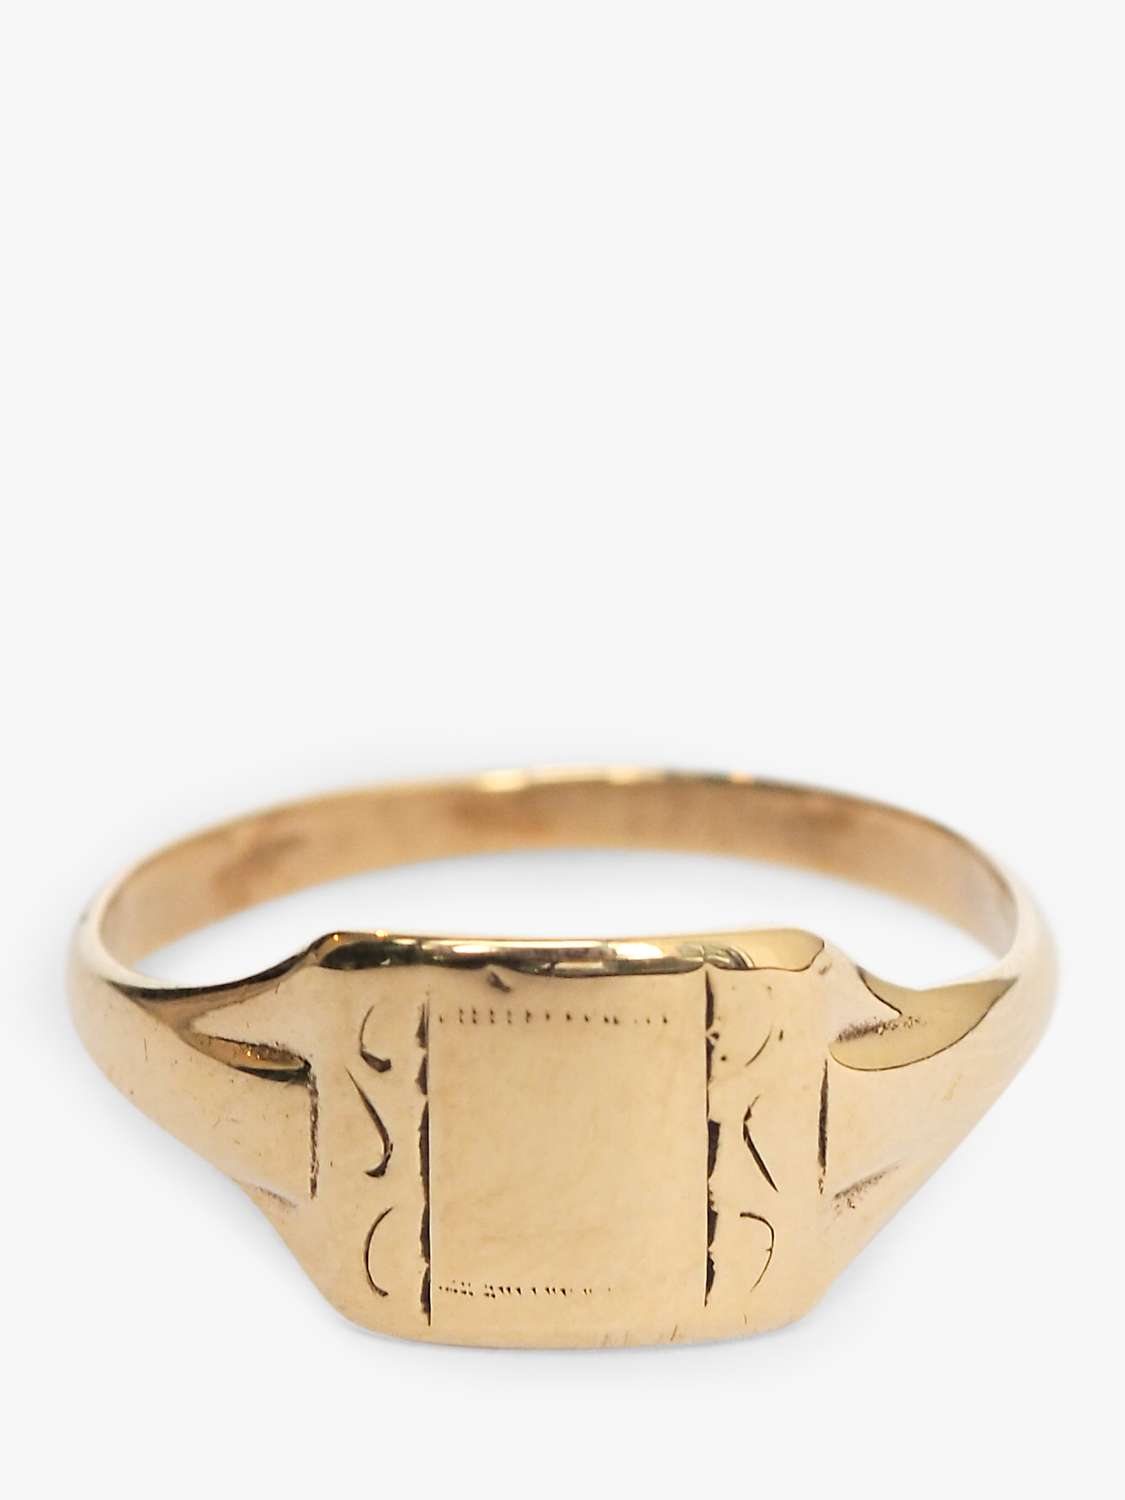 Buy L & T Heirlooms Second Hand 9ct Yellow Gold Signet Ring, Dated Circa 1971, Gold Online at johnlewis.com